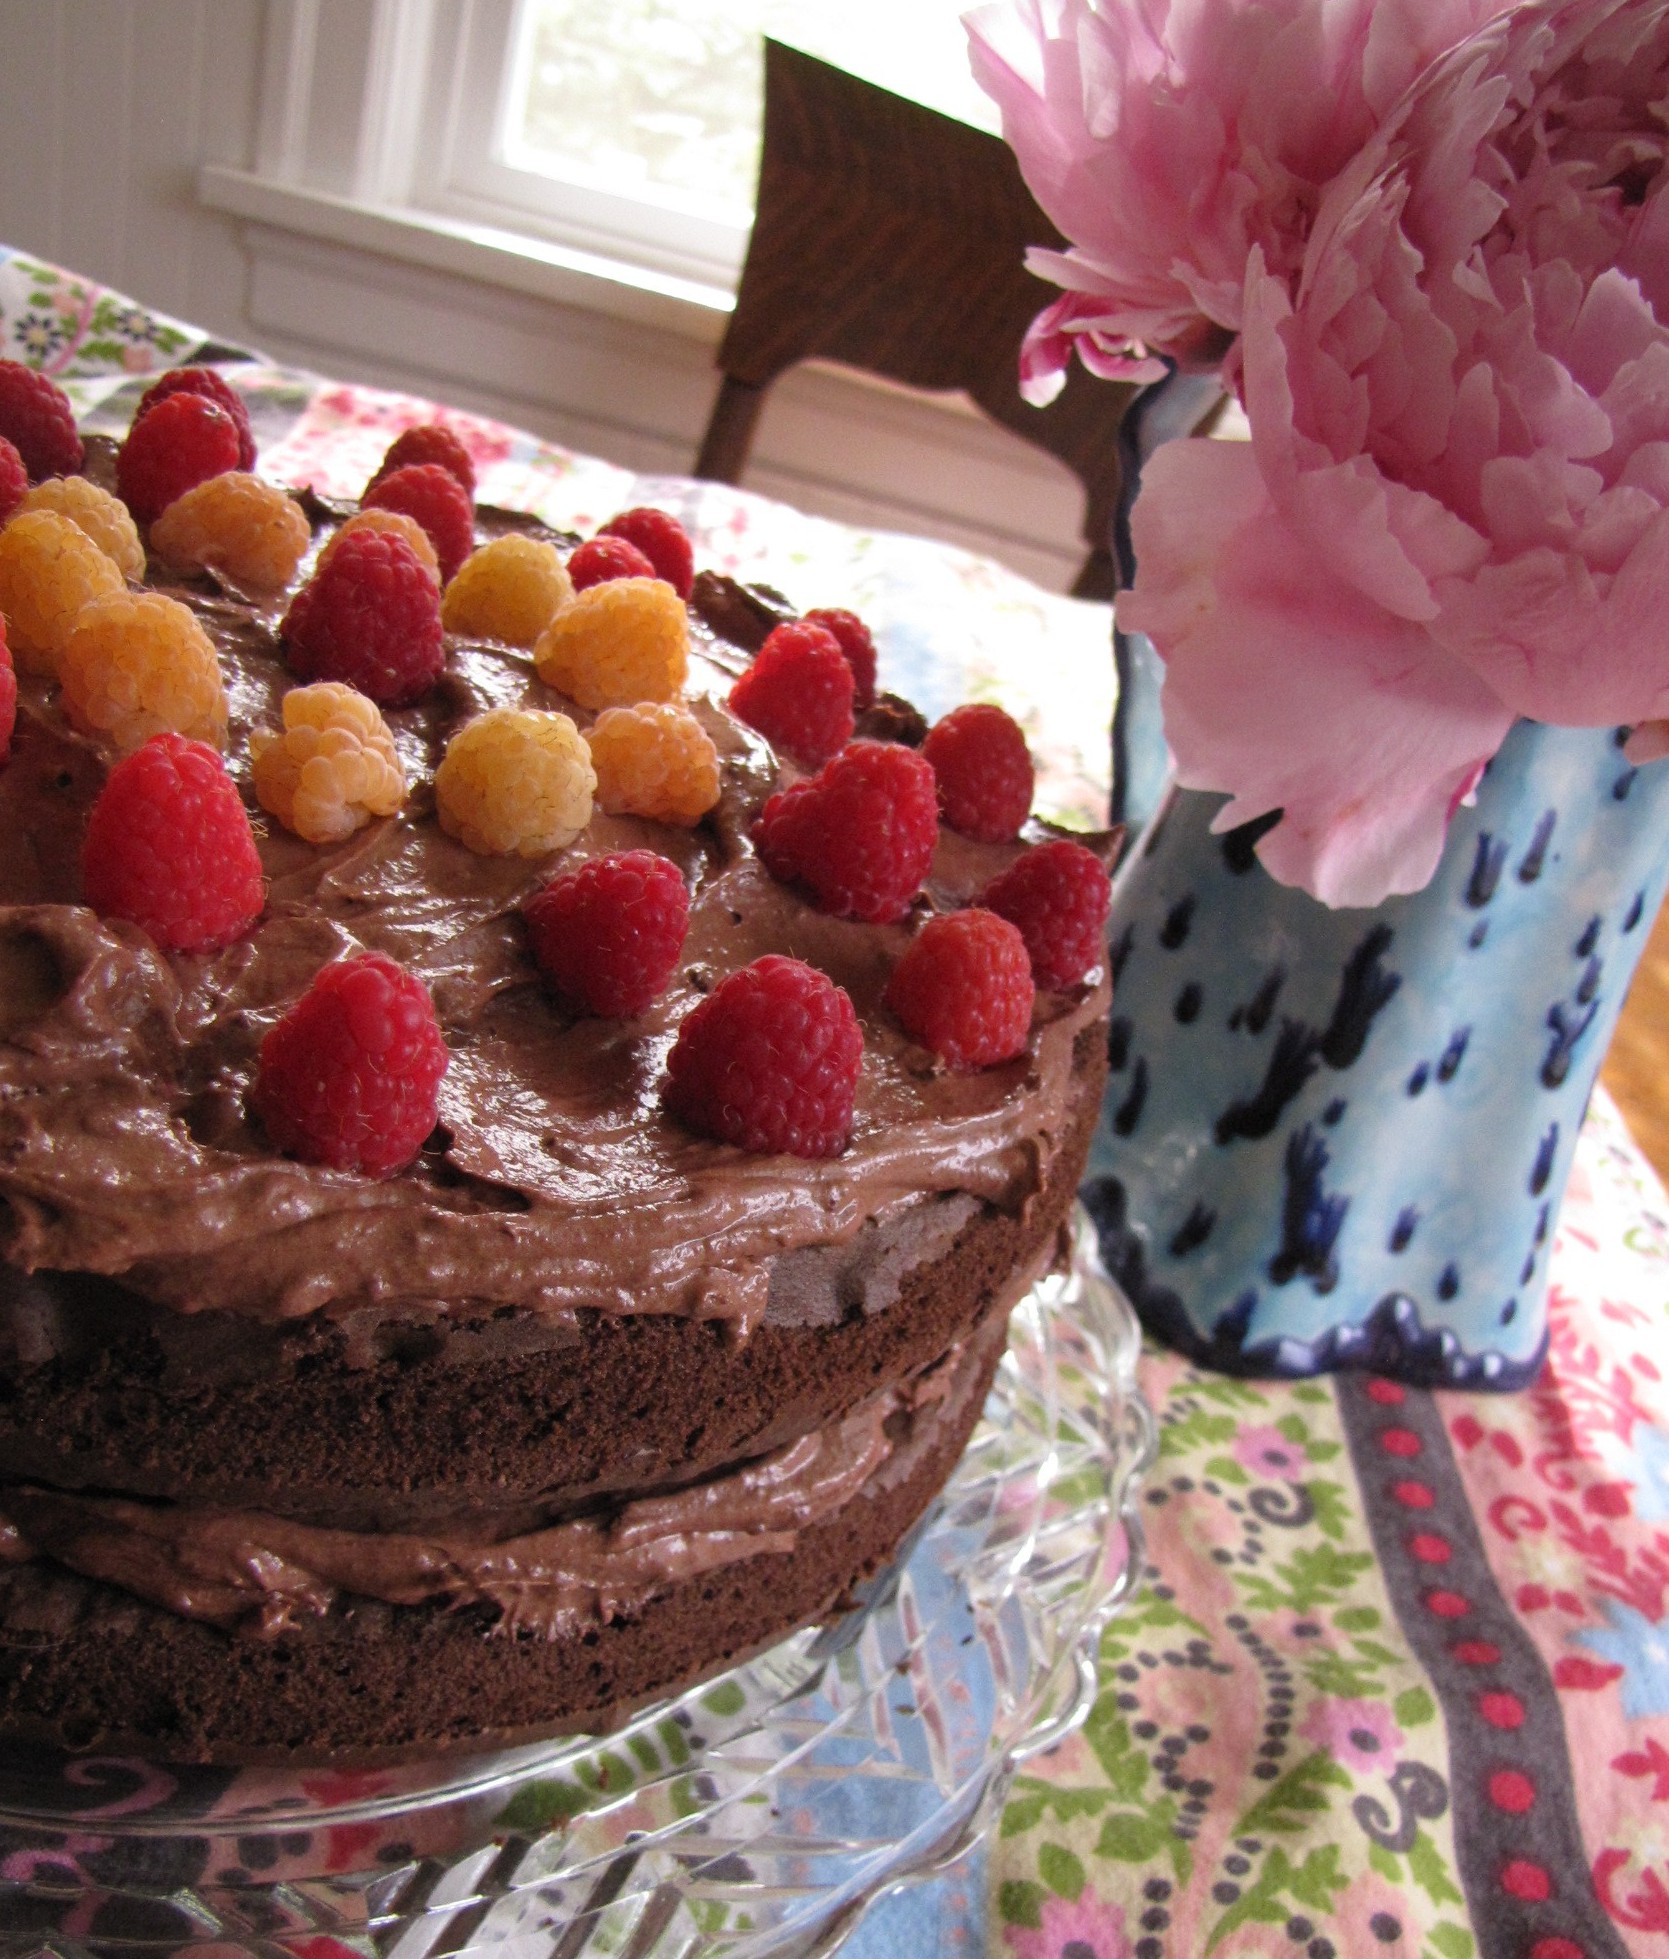 Dessert last night - chocolate cake with chocolate mousse and raspberries. 